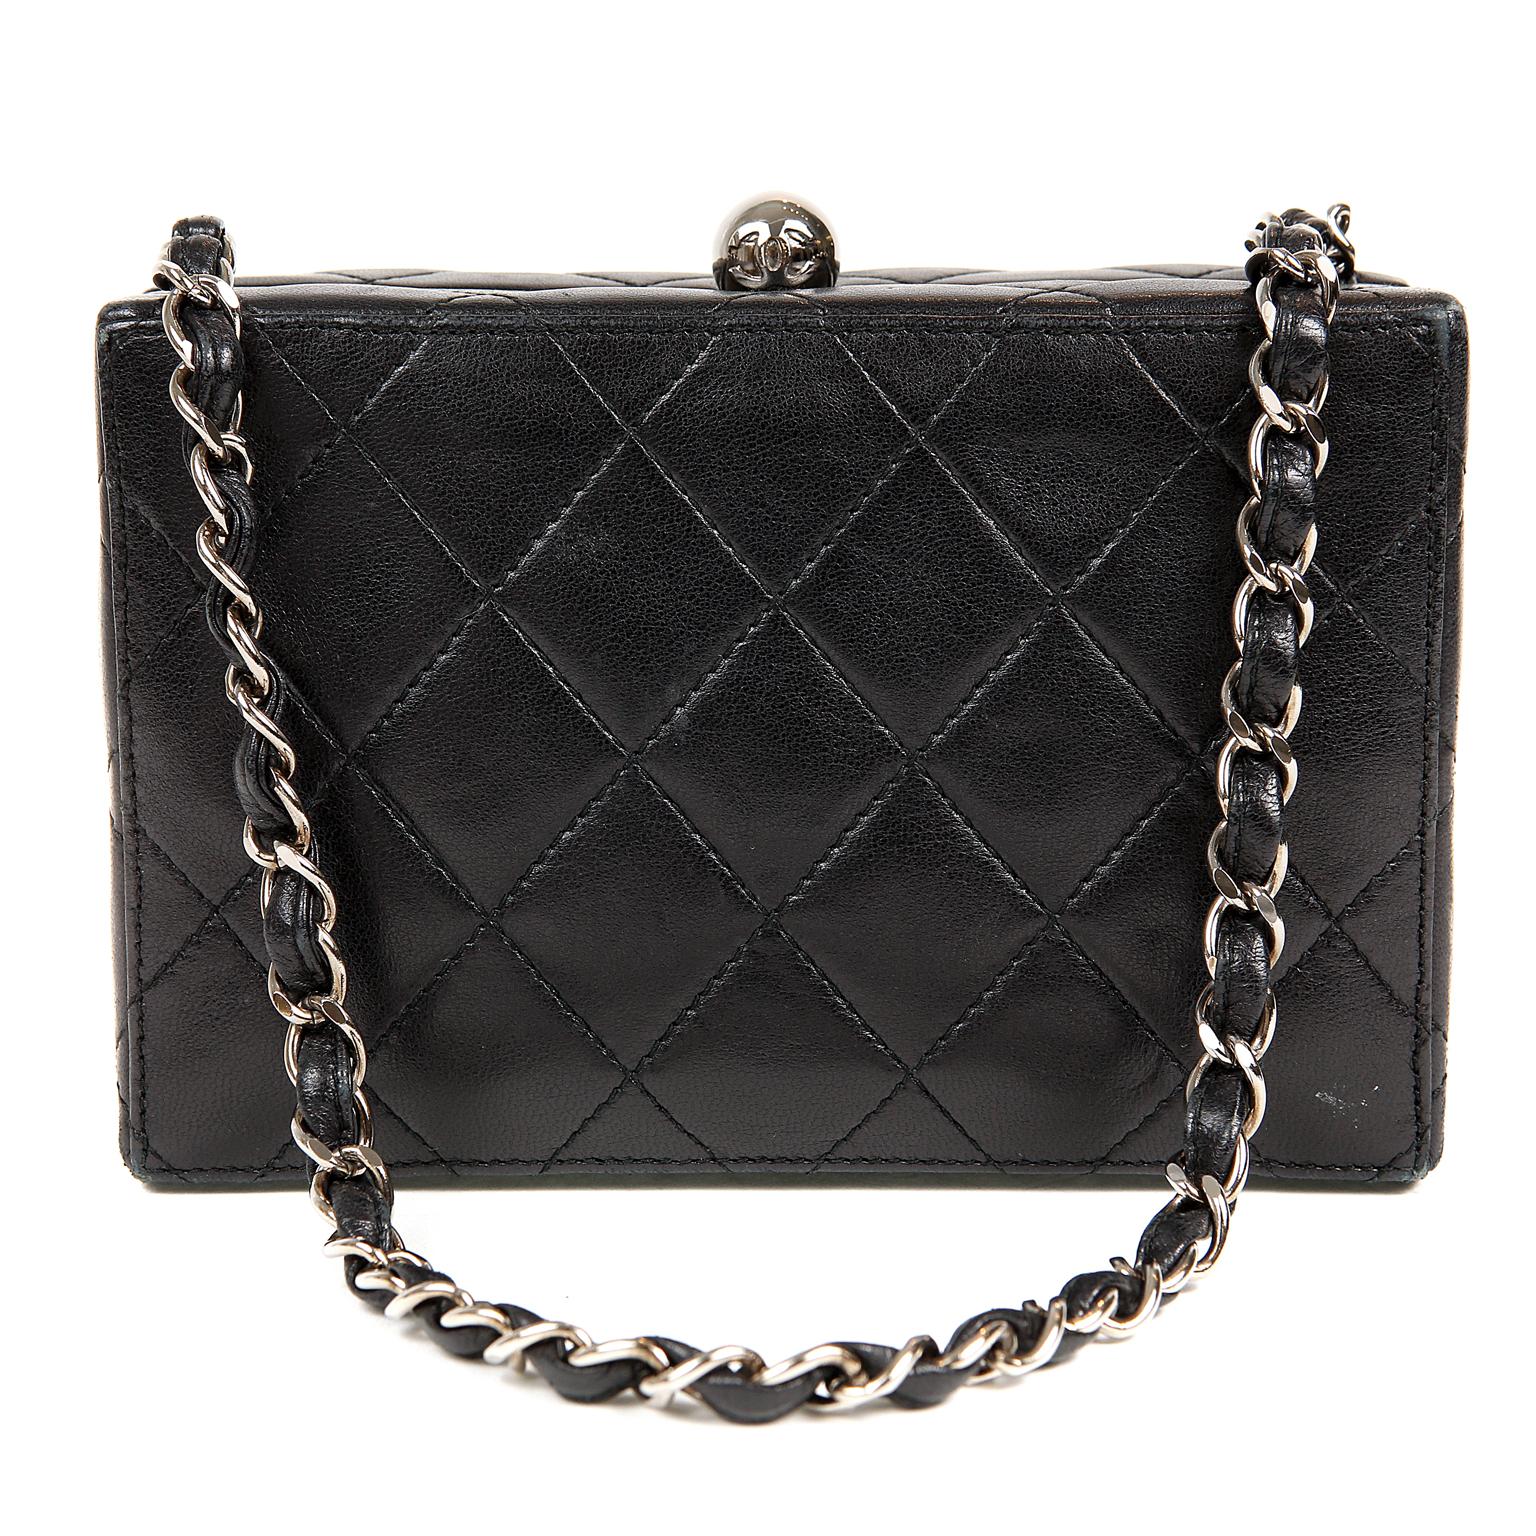 Chanel Black Quilted Leather Mini Box Bag 5